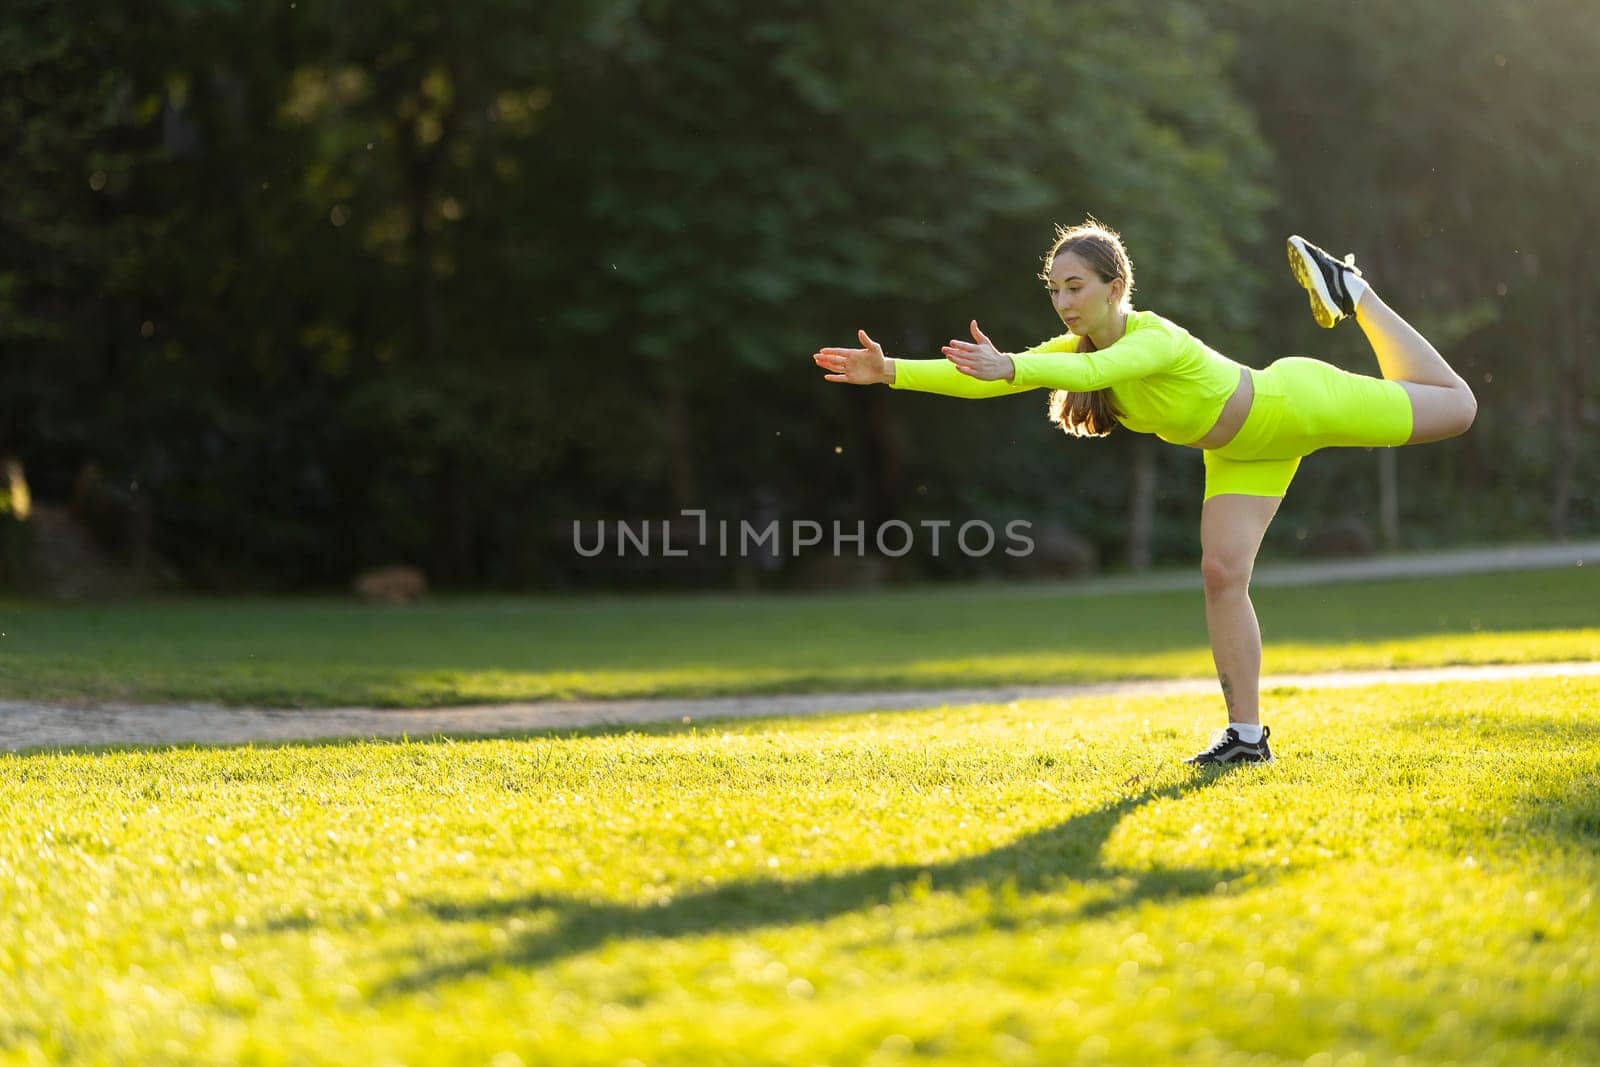 A woman is doing a yoga pose on a grassy field. The grass is green and the sky is blue